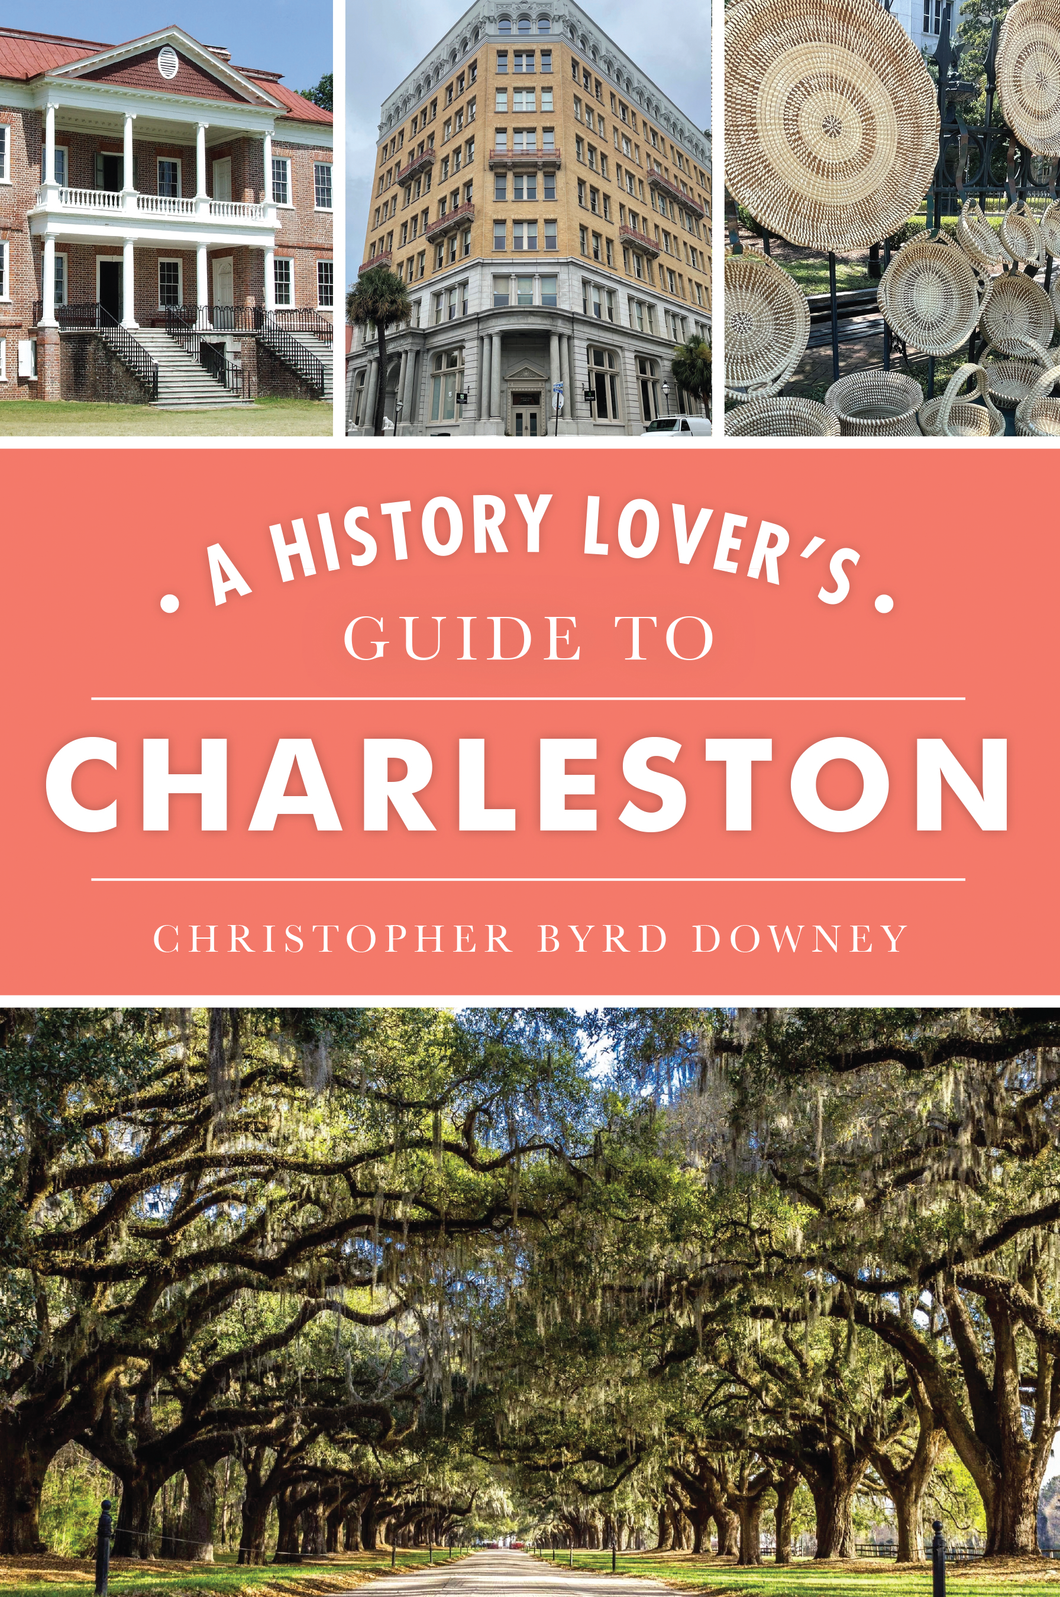 A History Lover's Guide to Charleston ~ Christopher Byrd Downey (2022 edition)